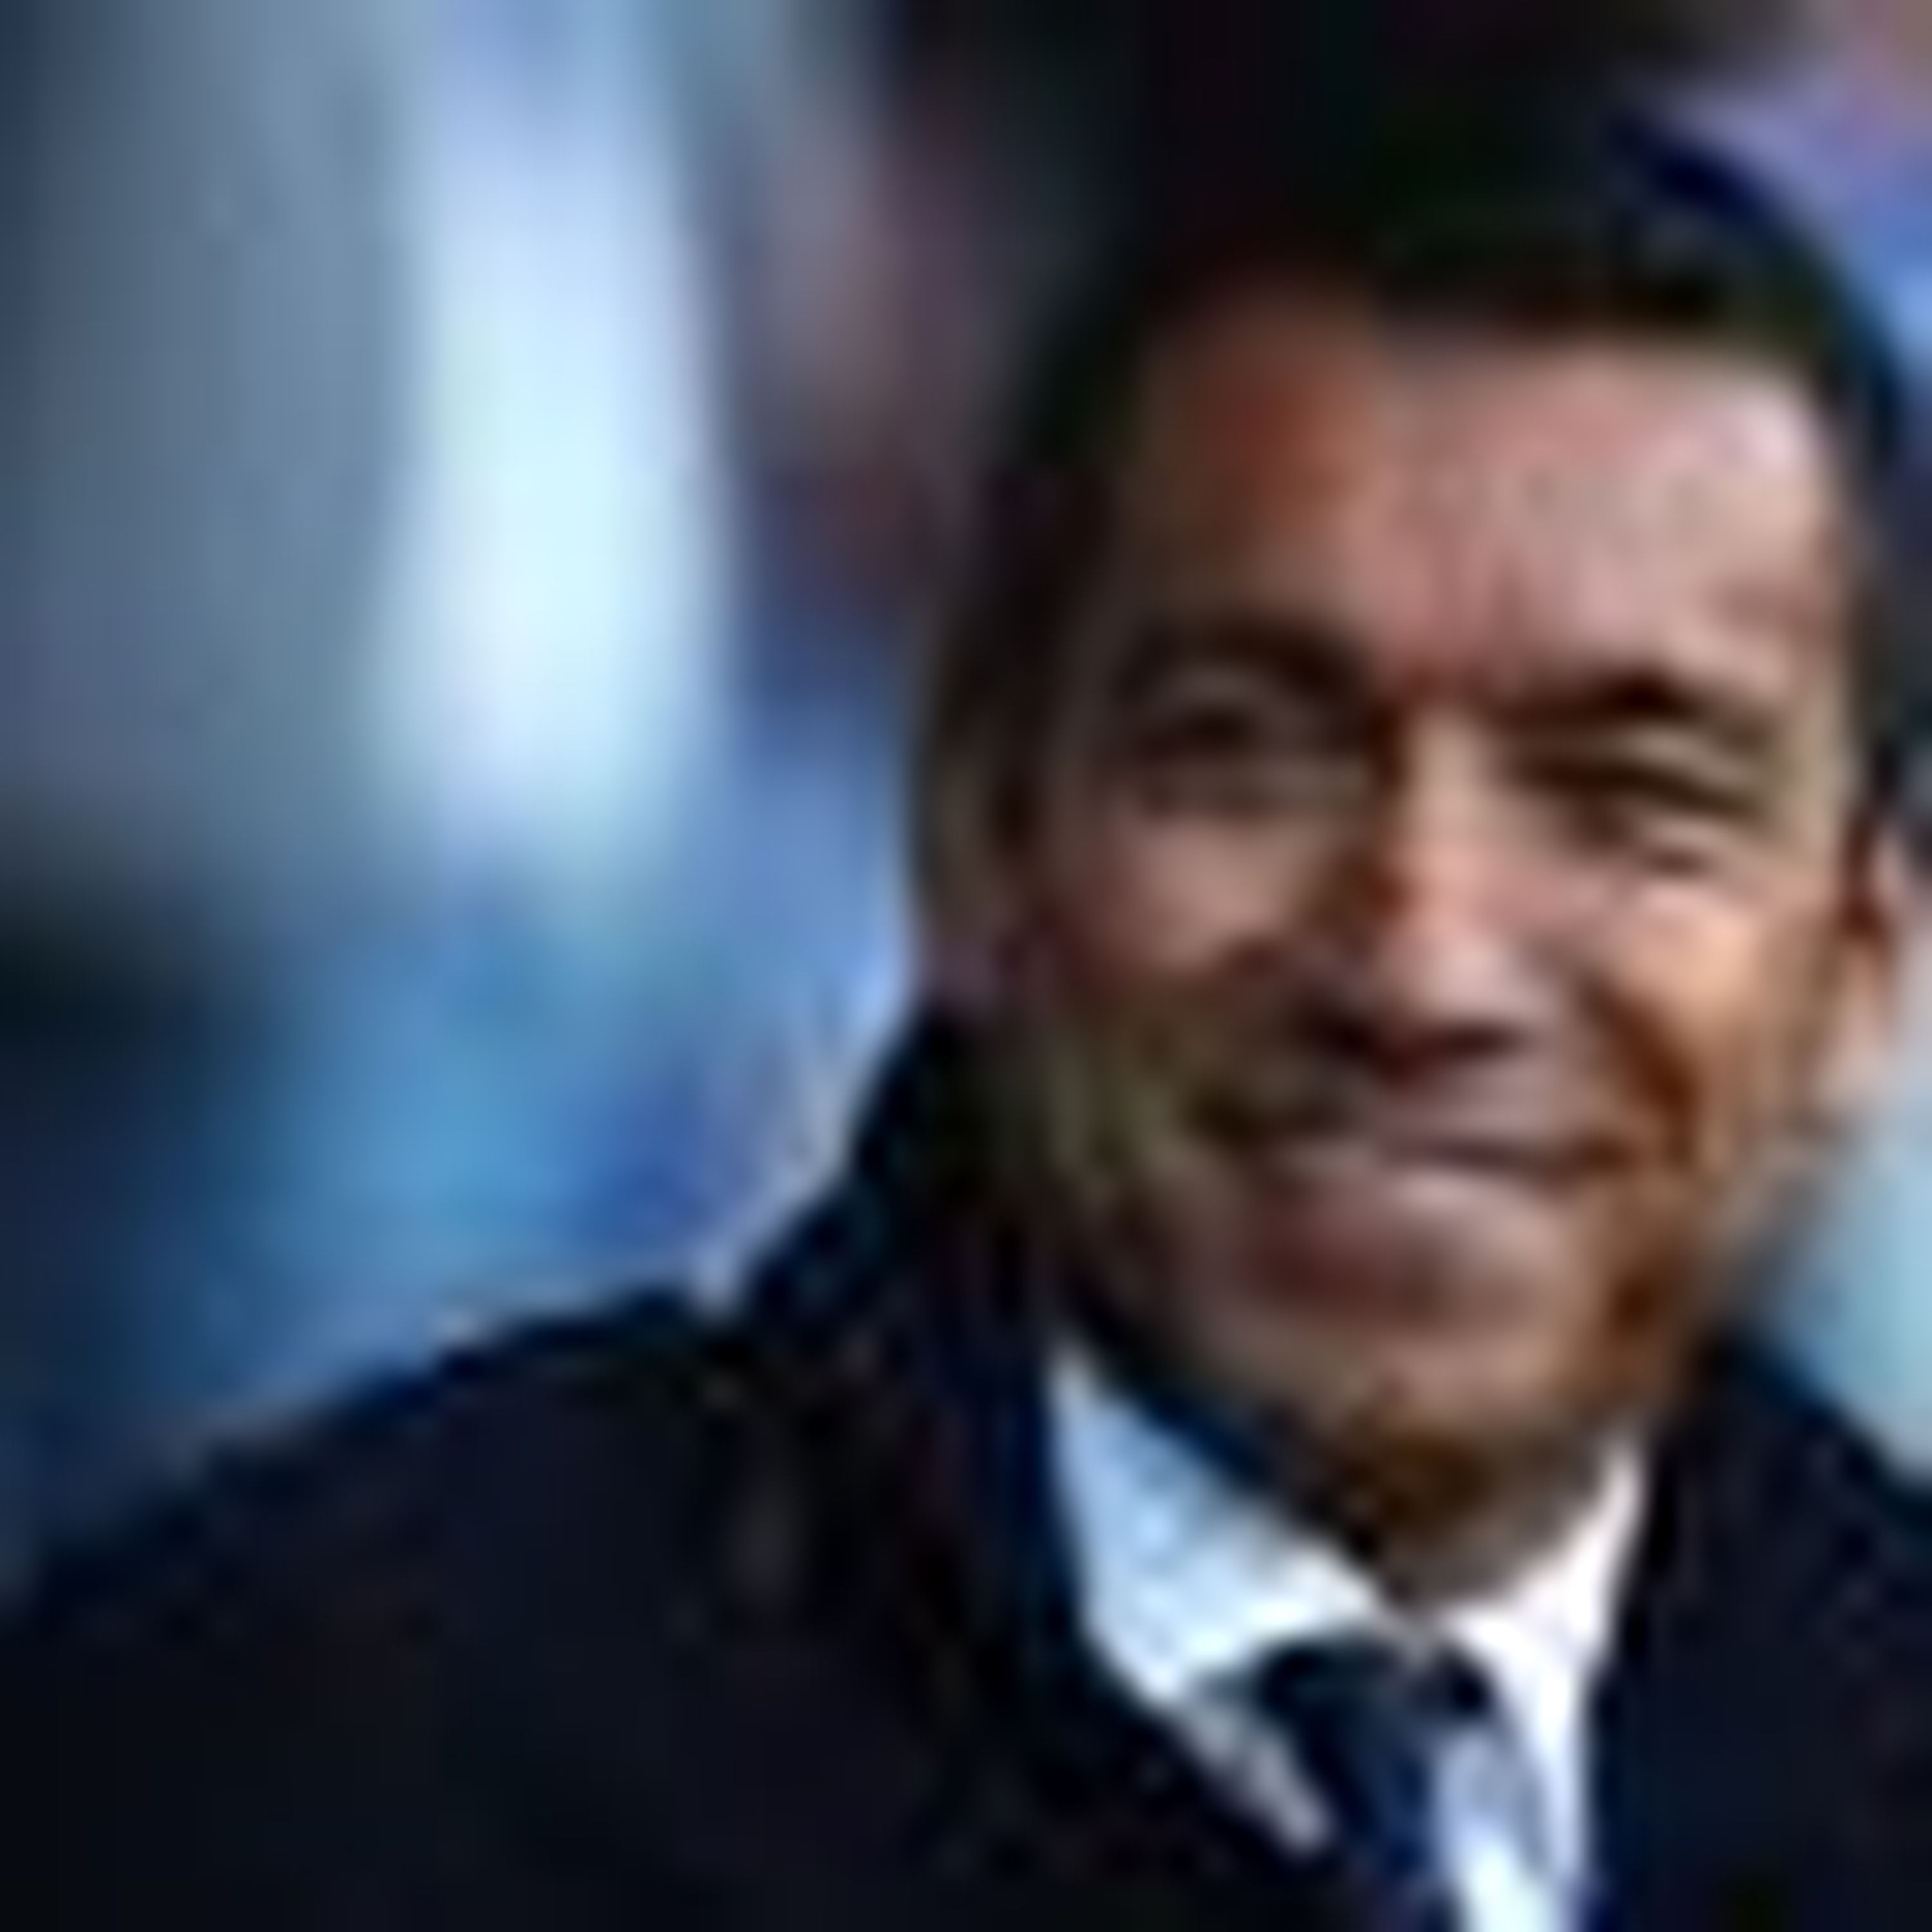 Inside Football with Guillem Balague: In conversation with former Arsenal and Barcelona star Giovanni van Bronckhorst